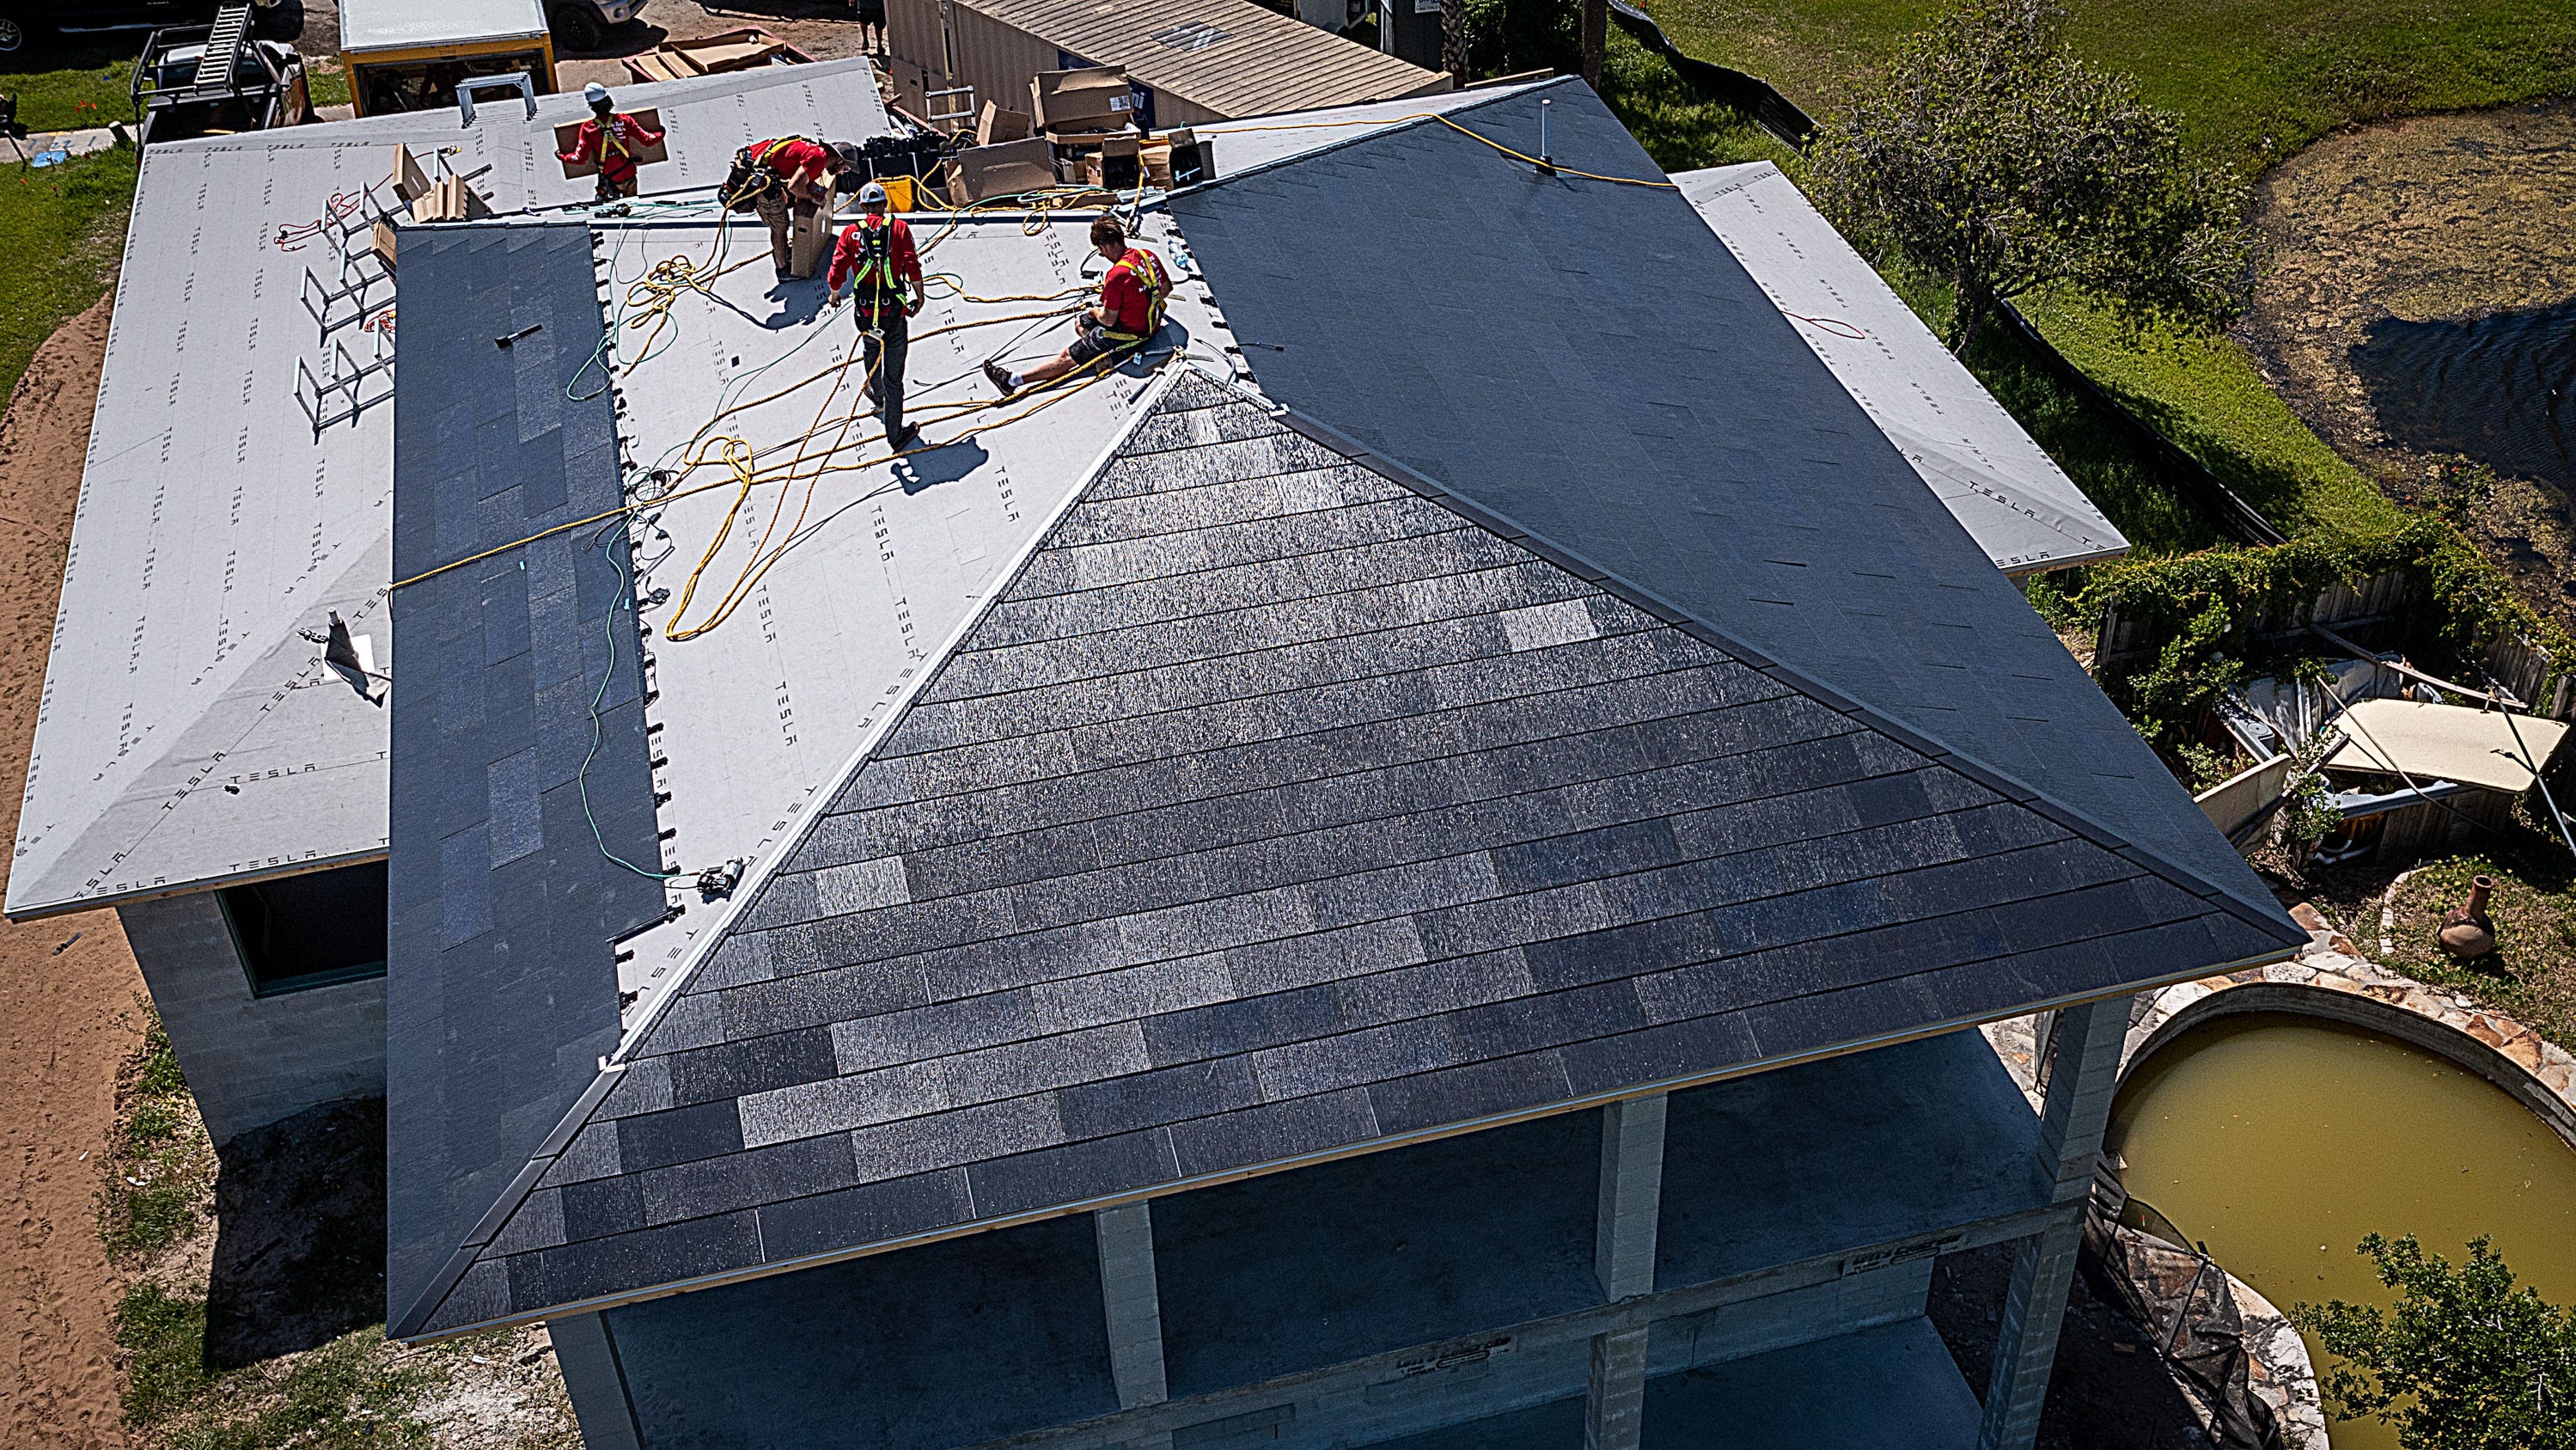 tesla-solar-roof-is-the-first-of-its-kind-in-st-johns-county